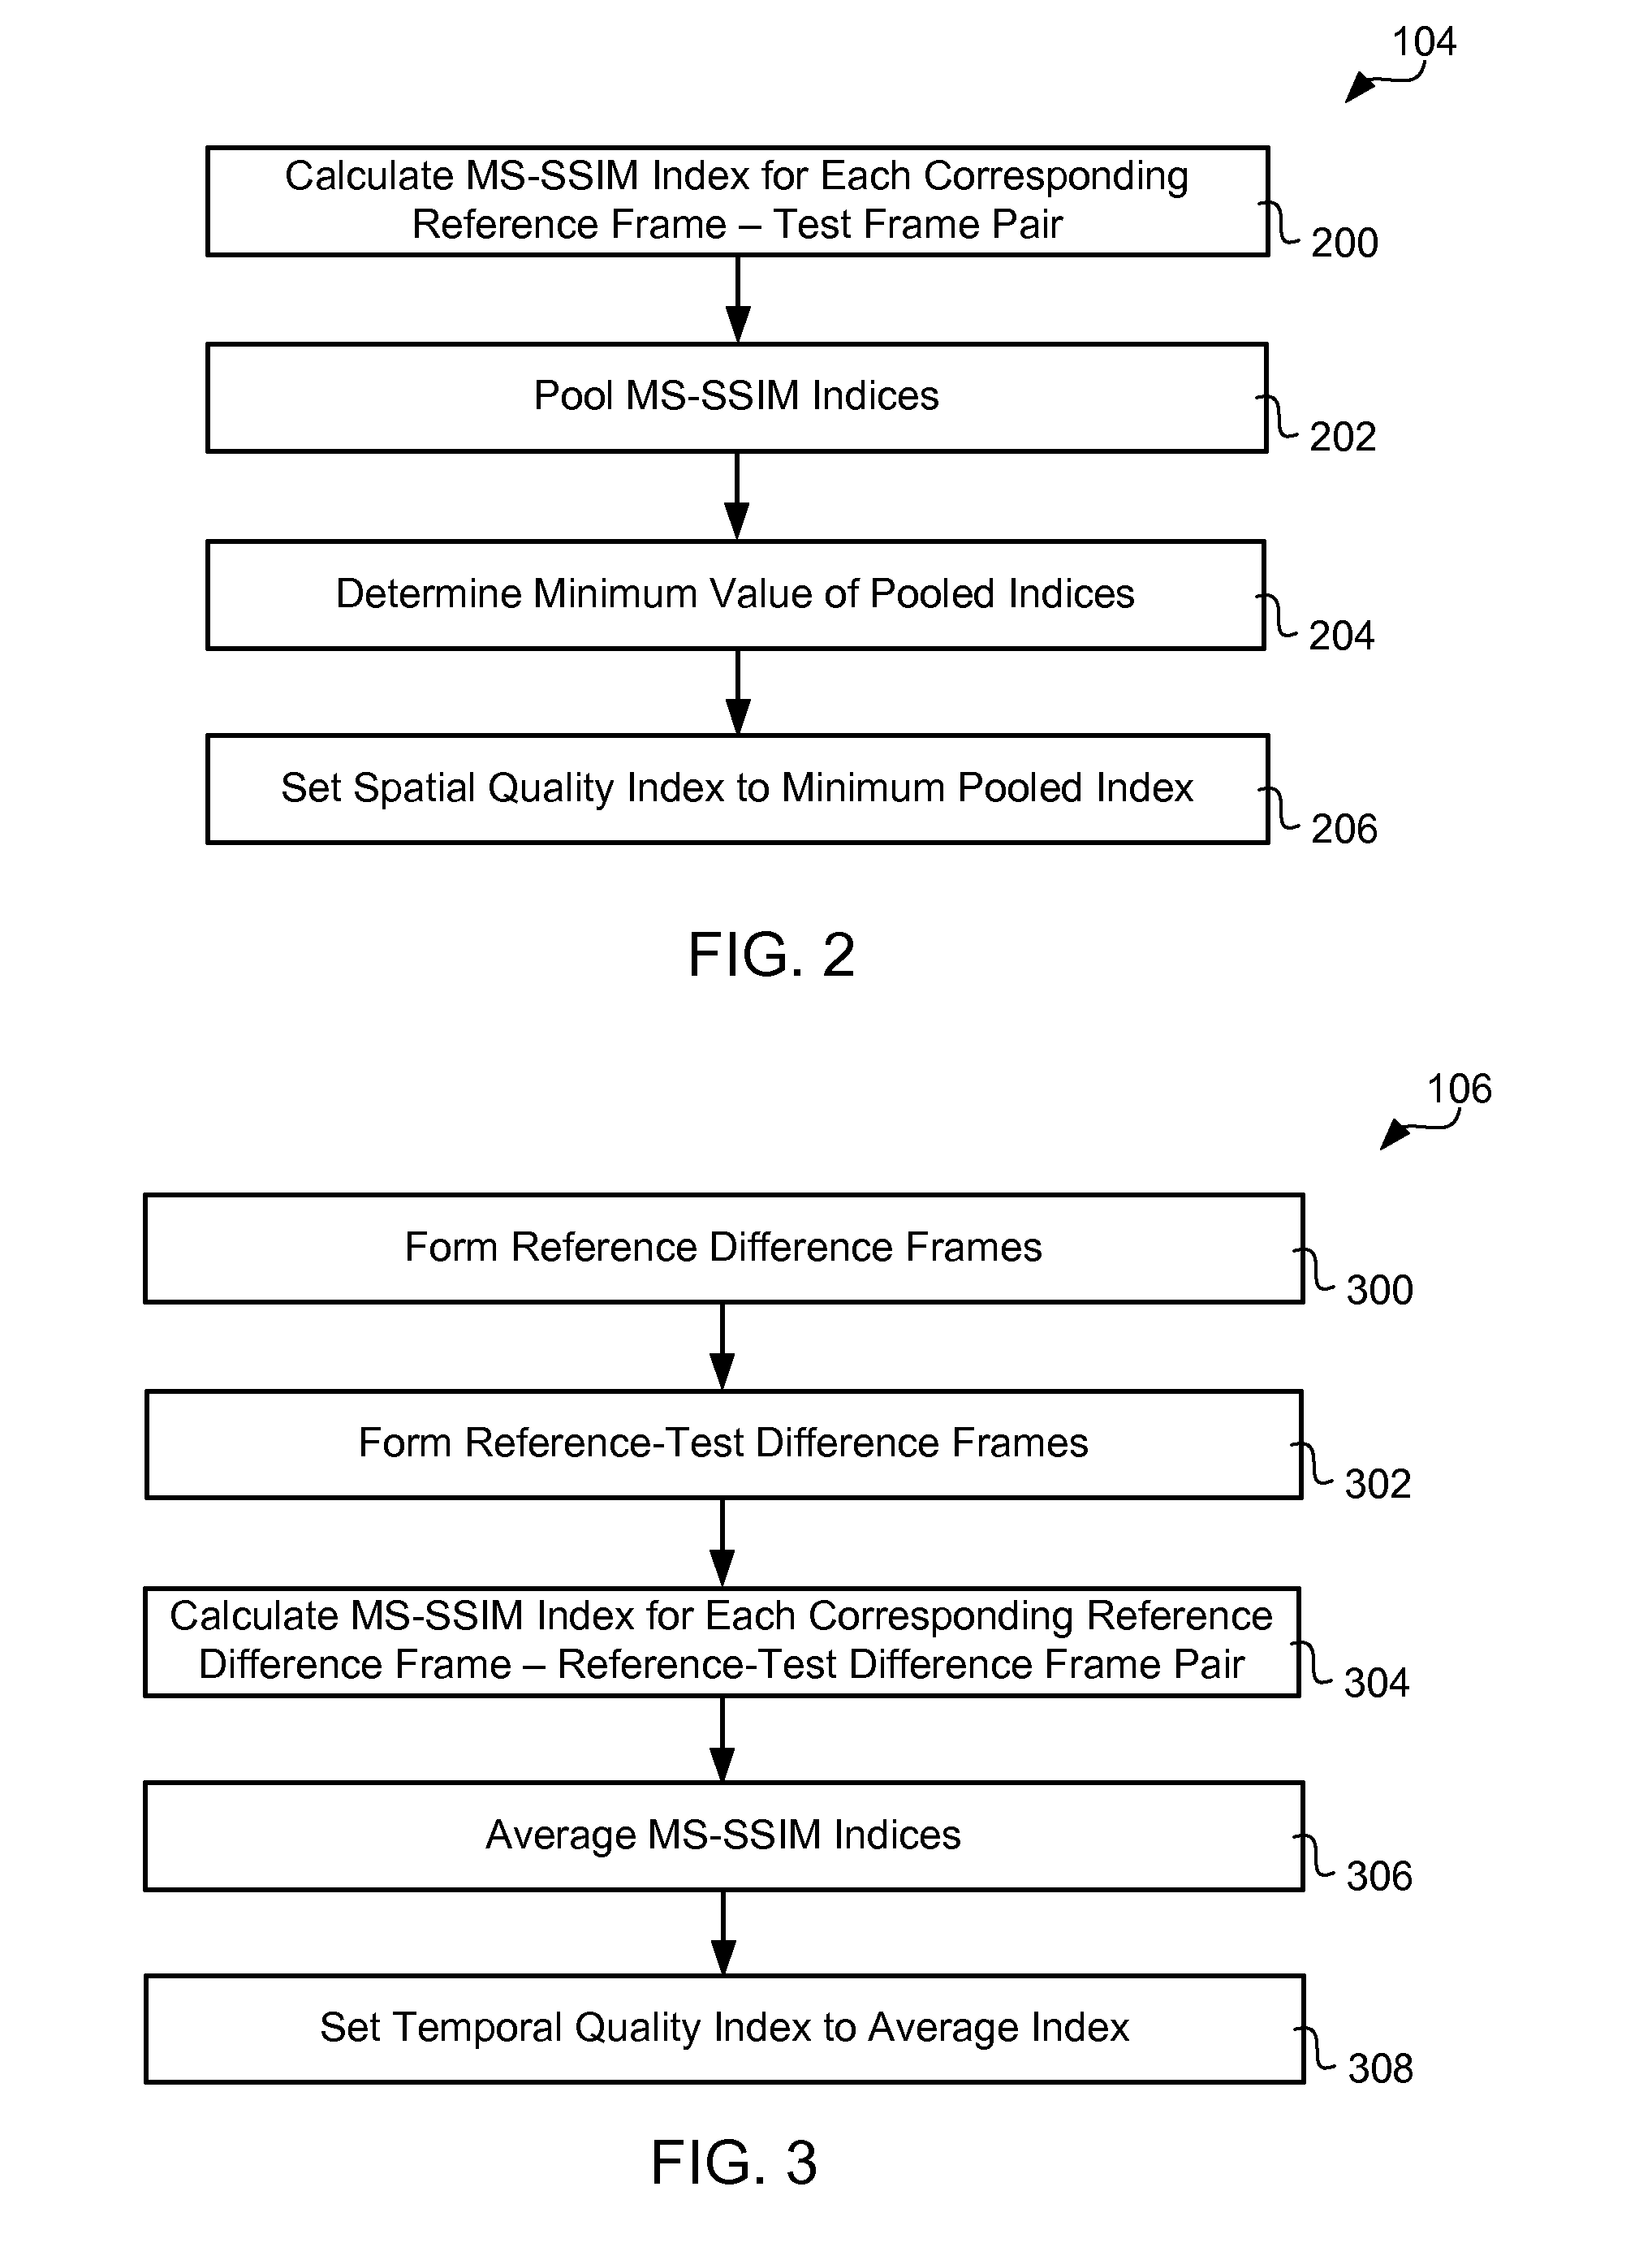 Methods, Systems and Apparatus for Automatic Video Quality Assessment